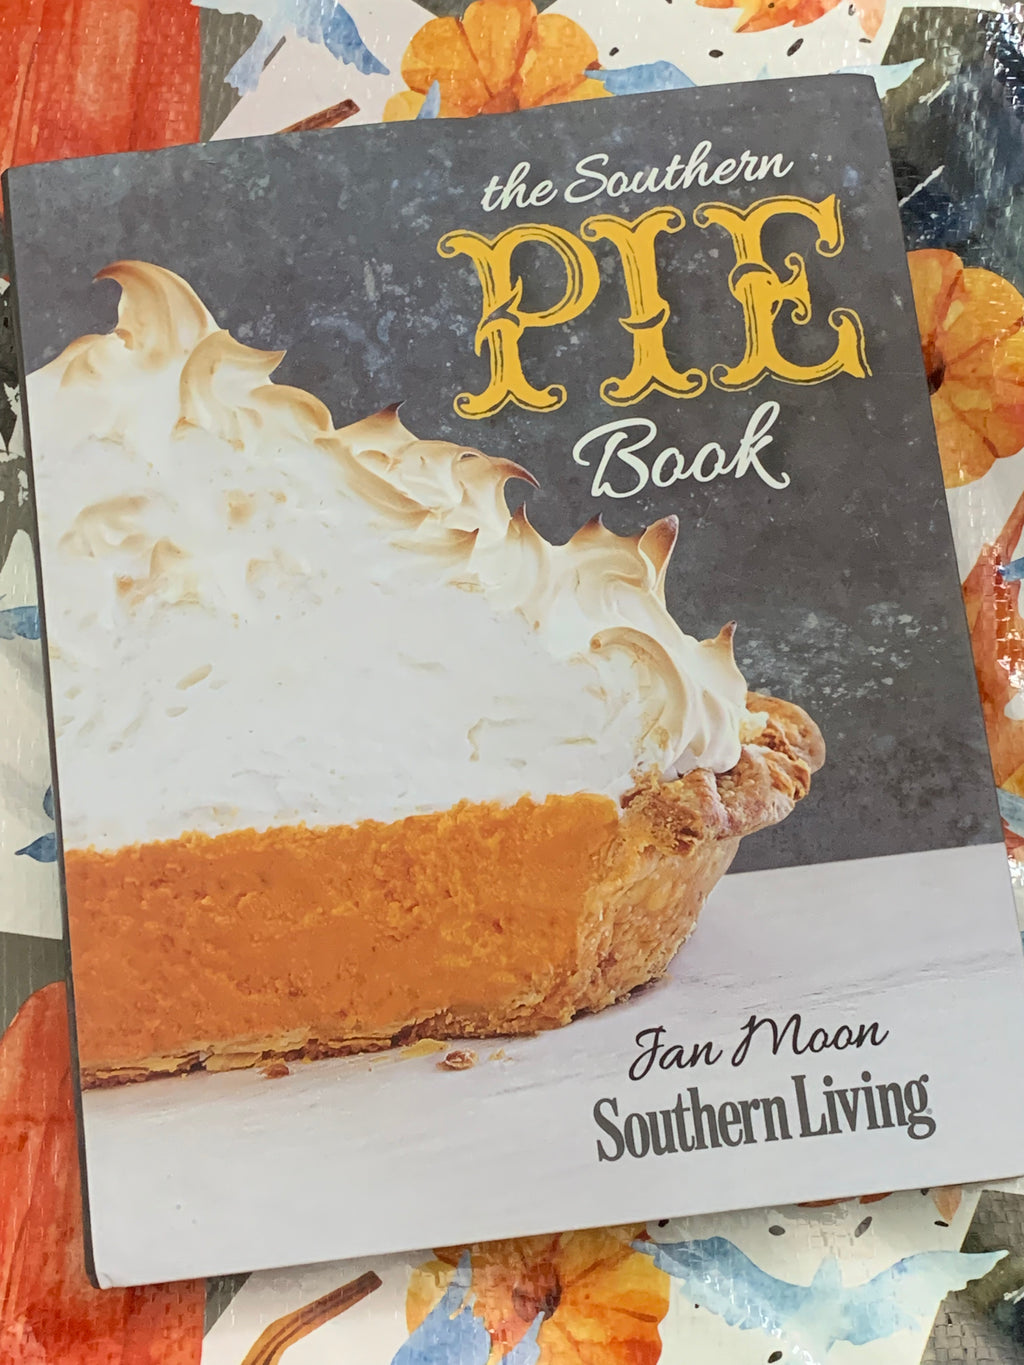 Southern Living: The Southern Pie Book- By Jan Moon